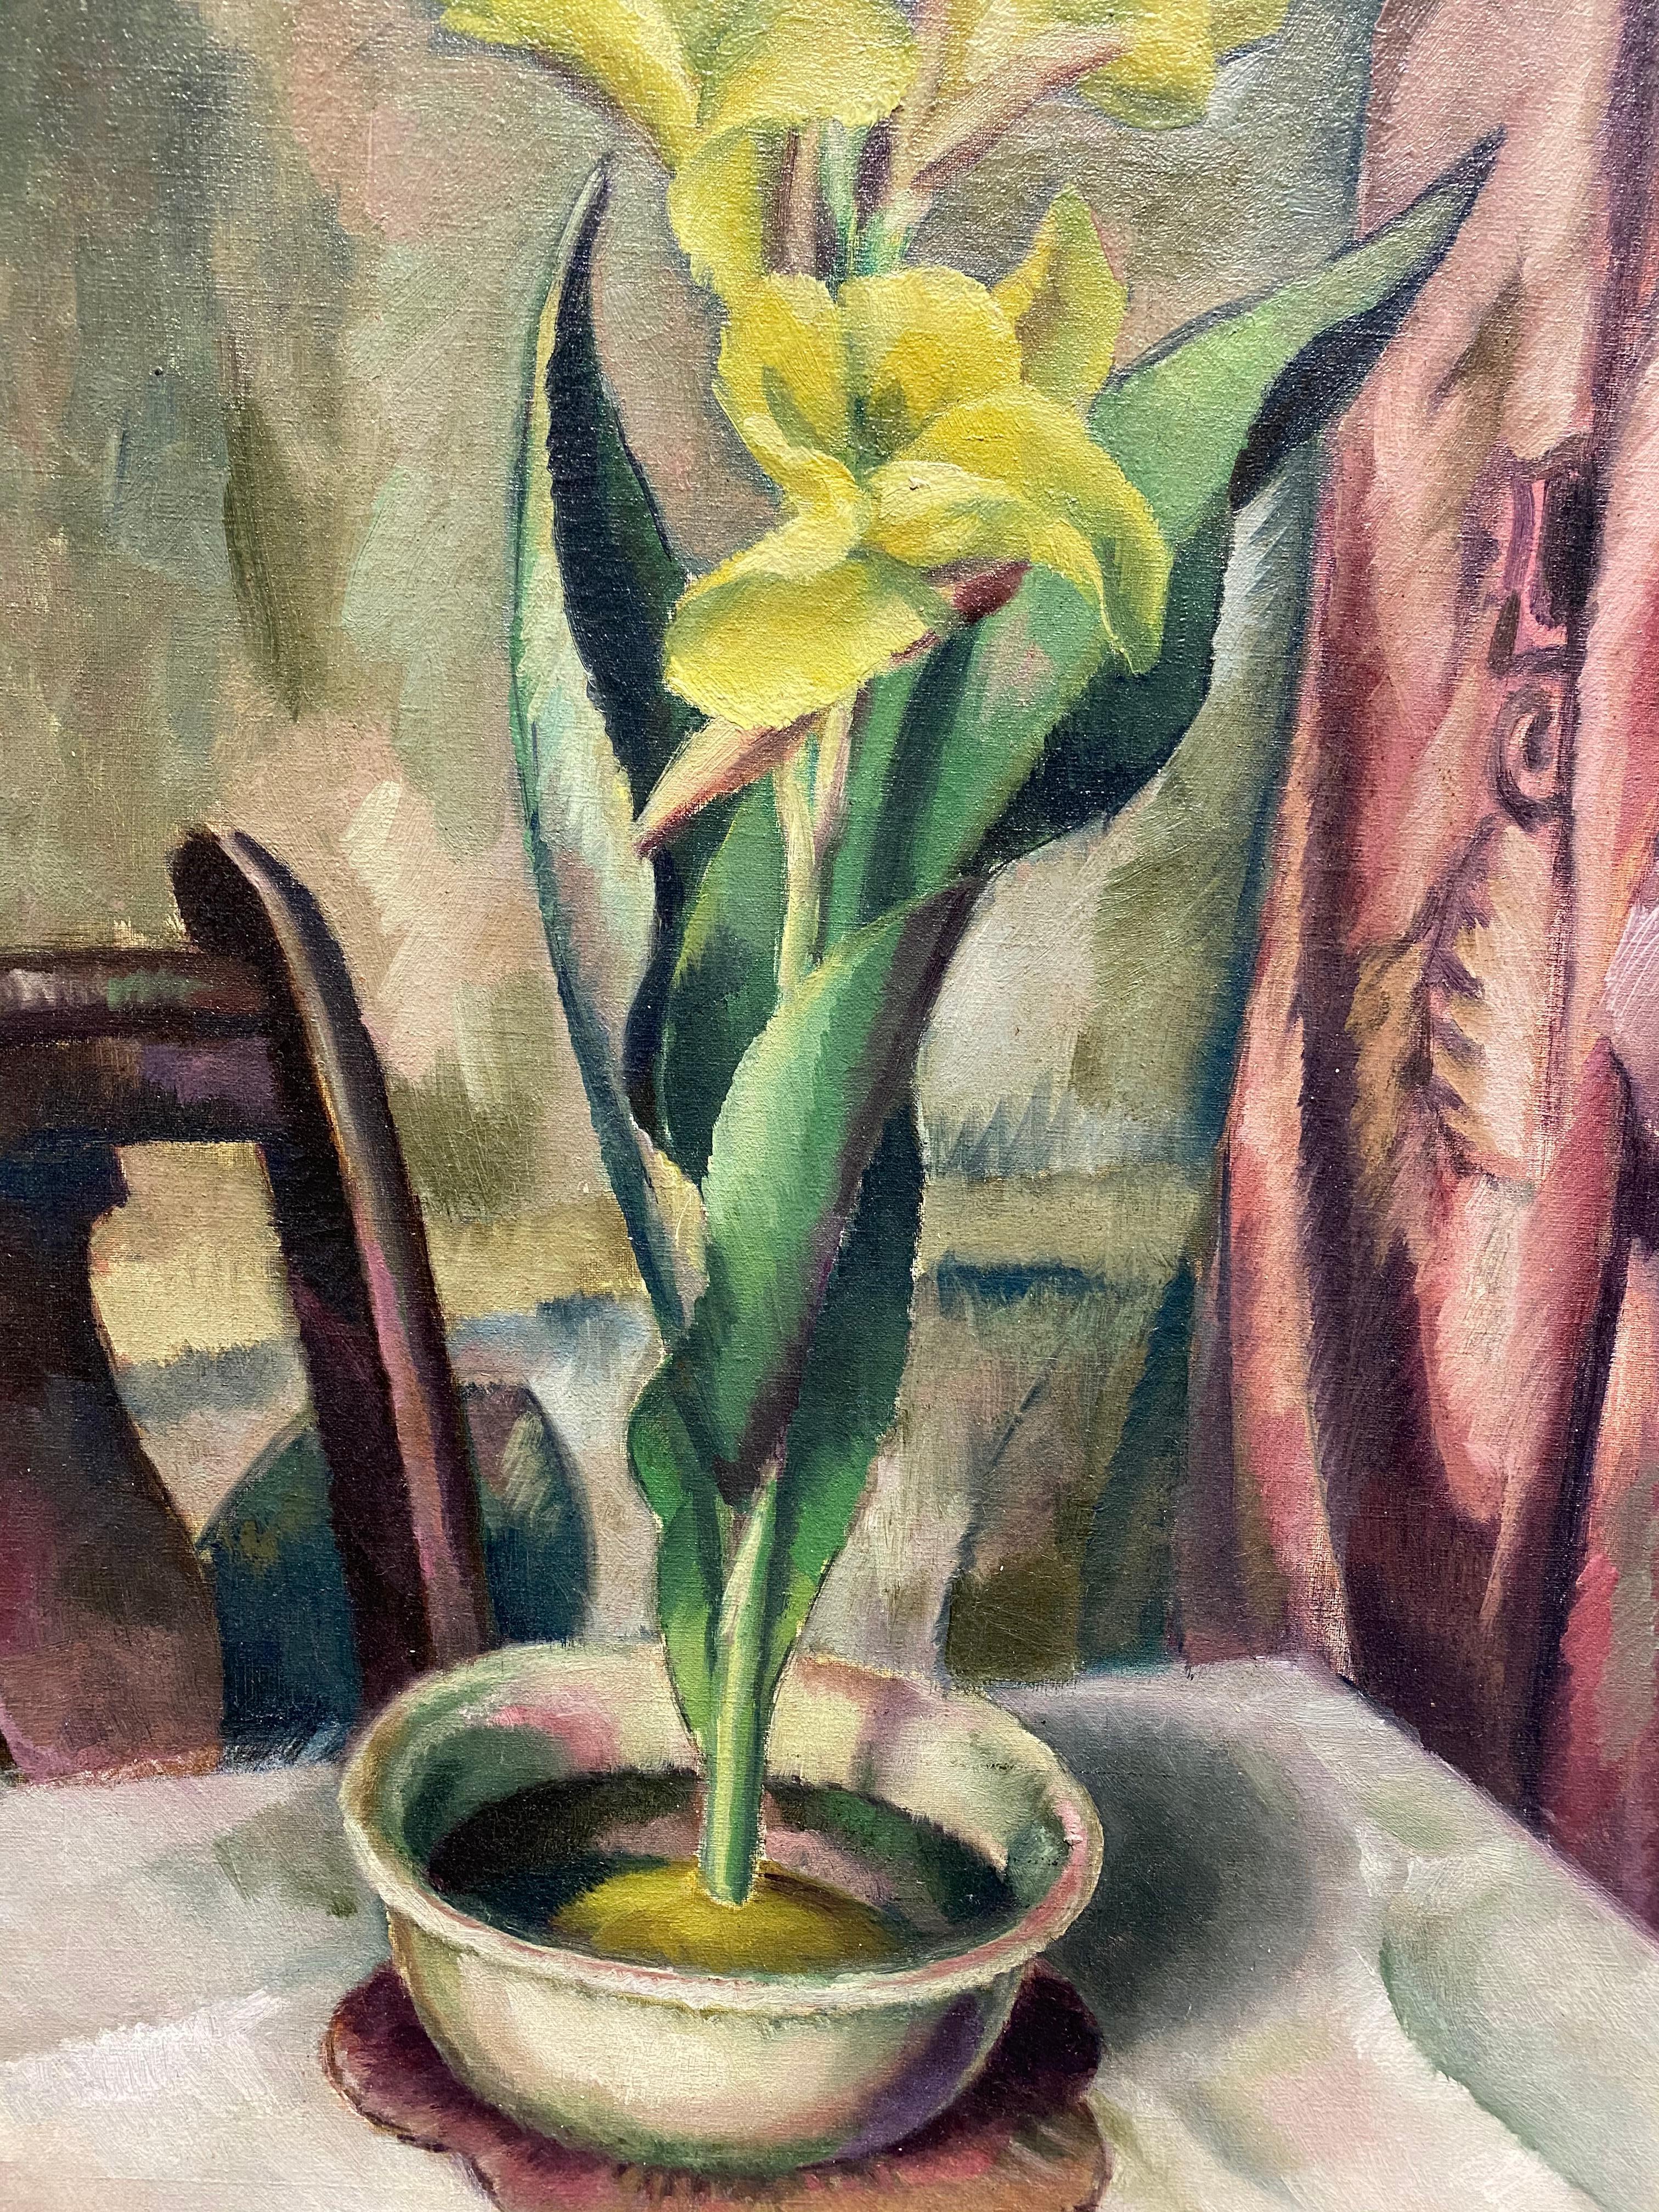 Yellow Canna Lillies, American Modernism, Still Life, c. 1922 - Painting by Edward Middleton Manigault